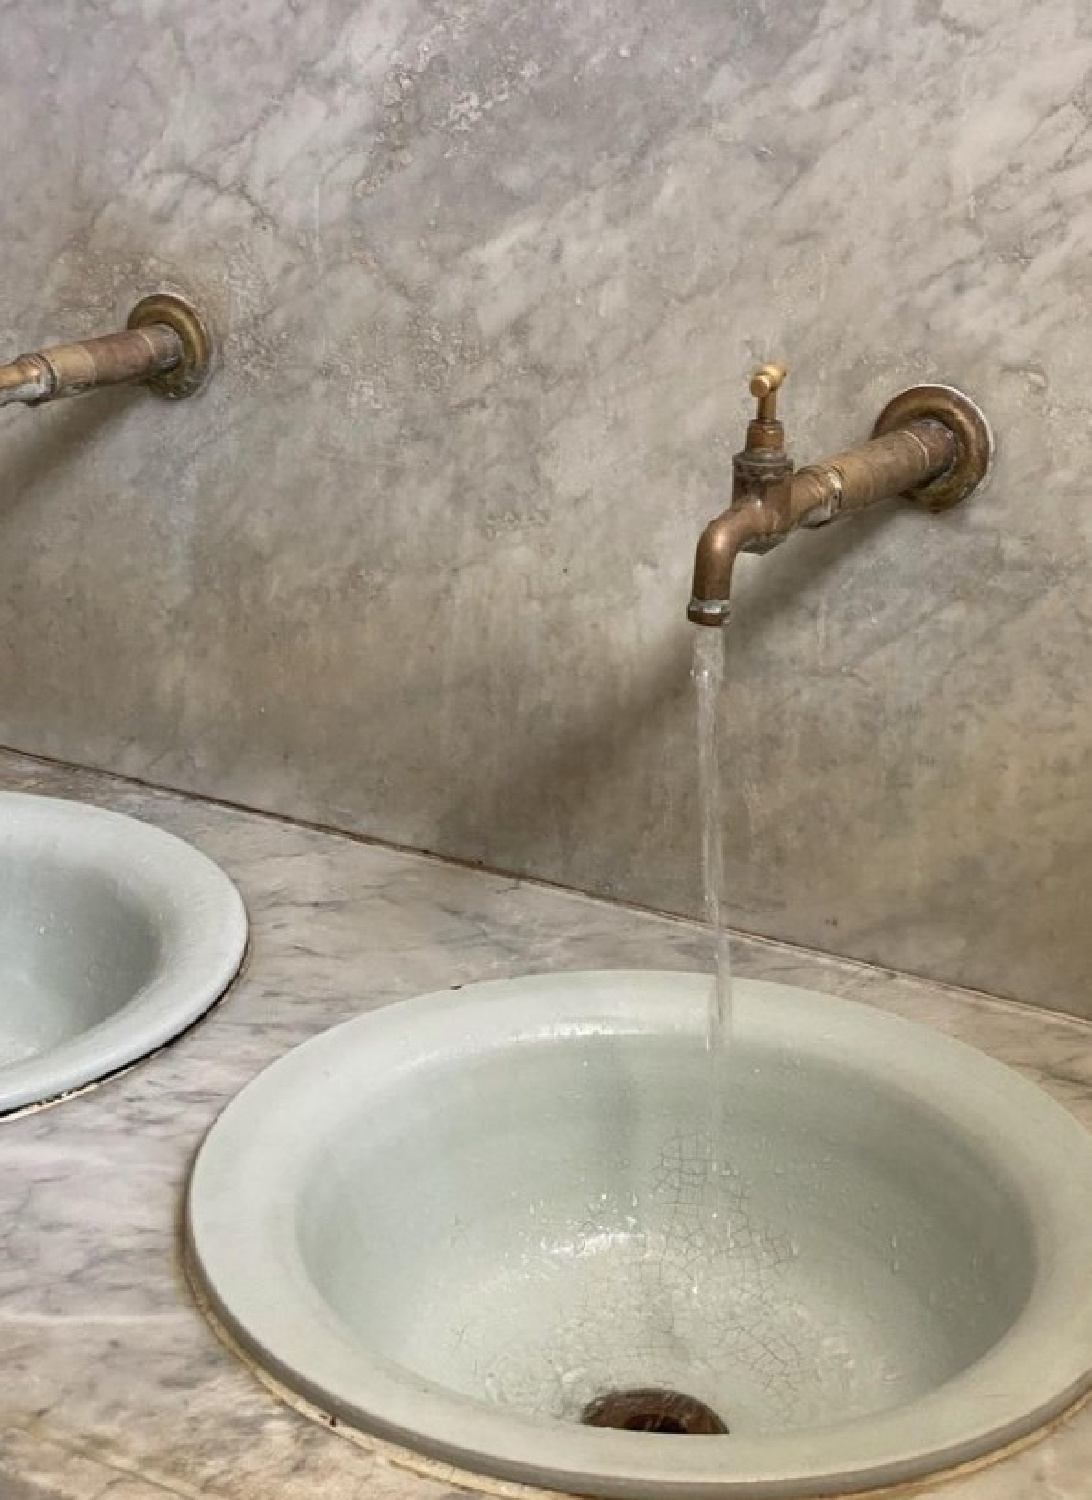 Modern warm rustic bathroom sinks with patinaed brass wall mount faucets - @rebeccagoddard.